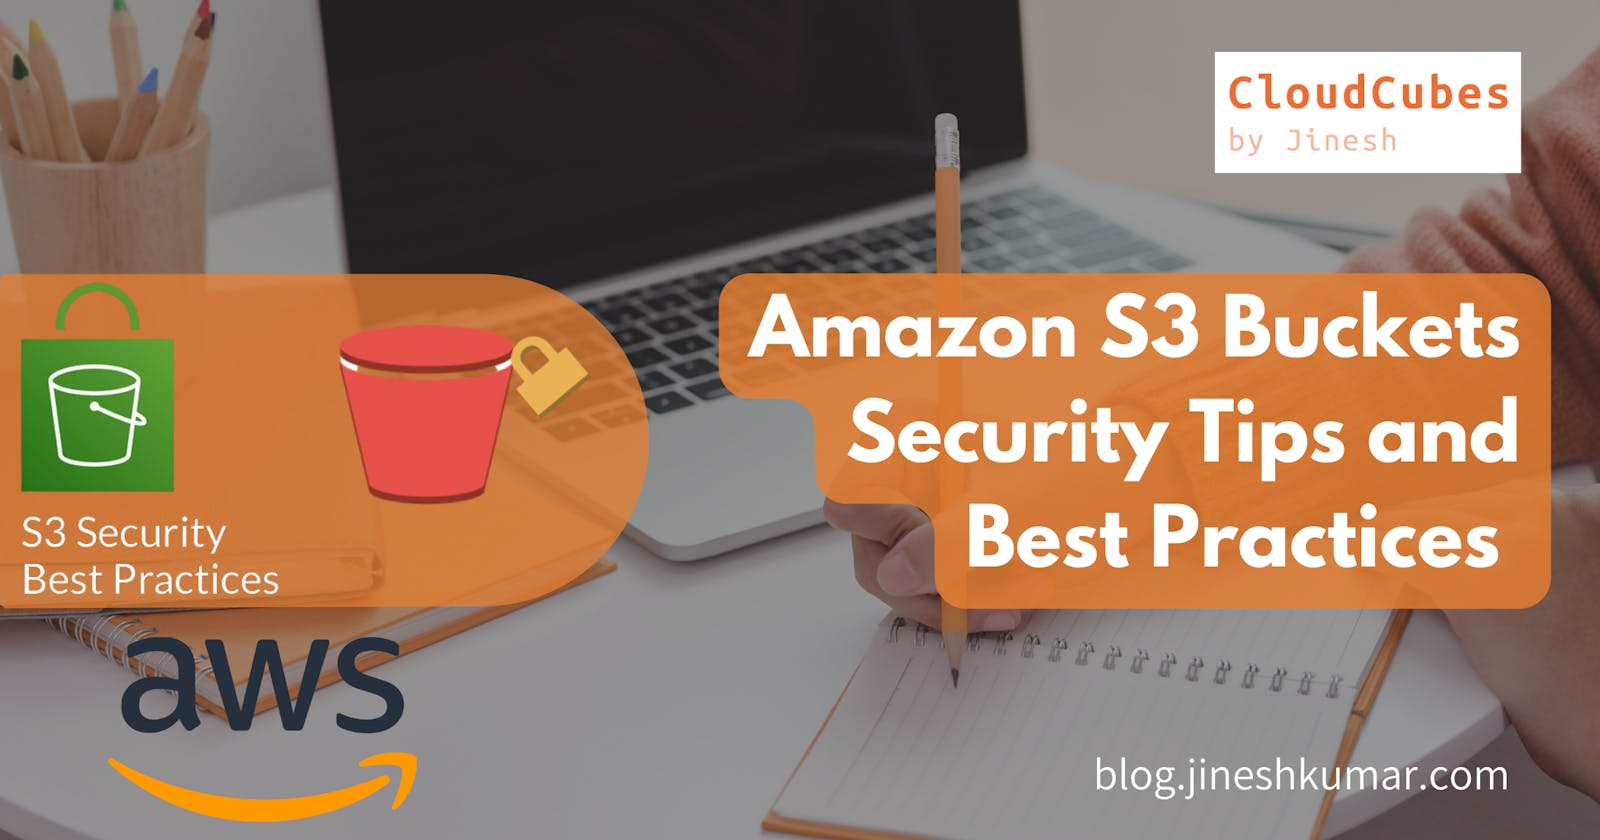 Keep Your Amazon S3 Buckets Secure: 
Top Tips and Best Practices